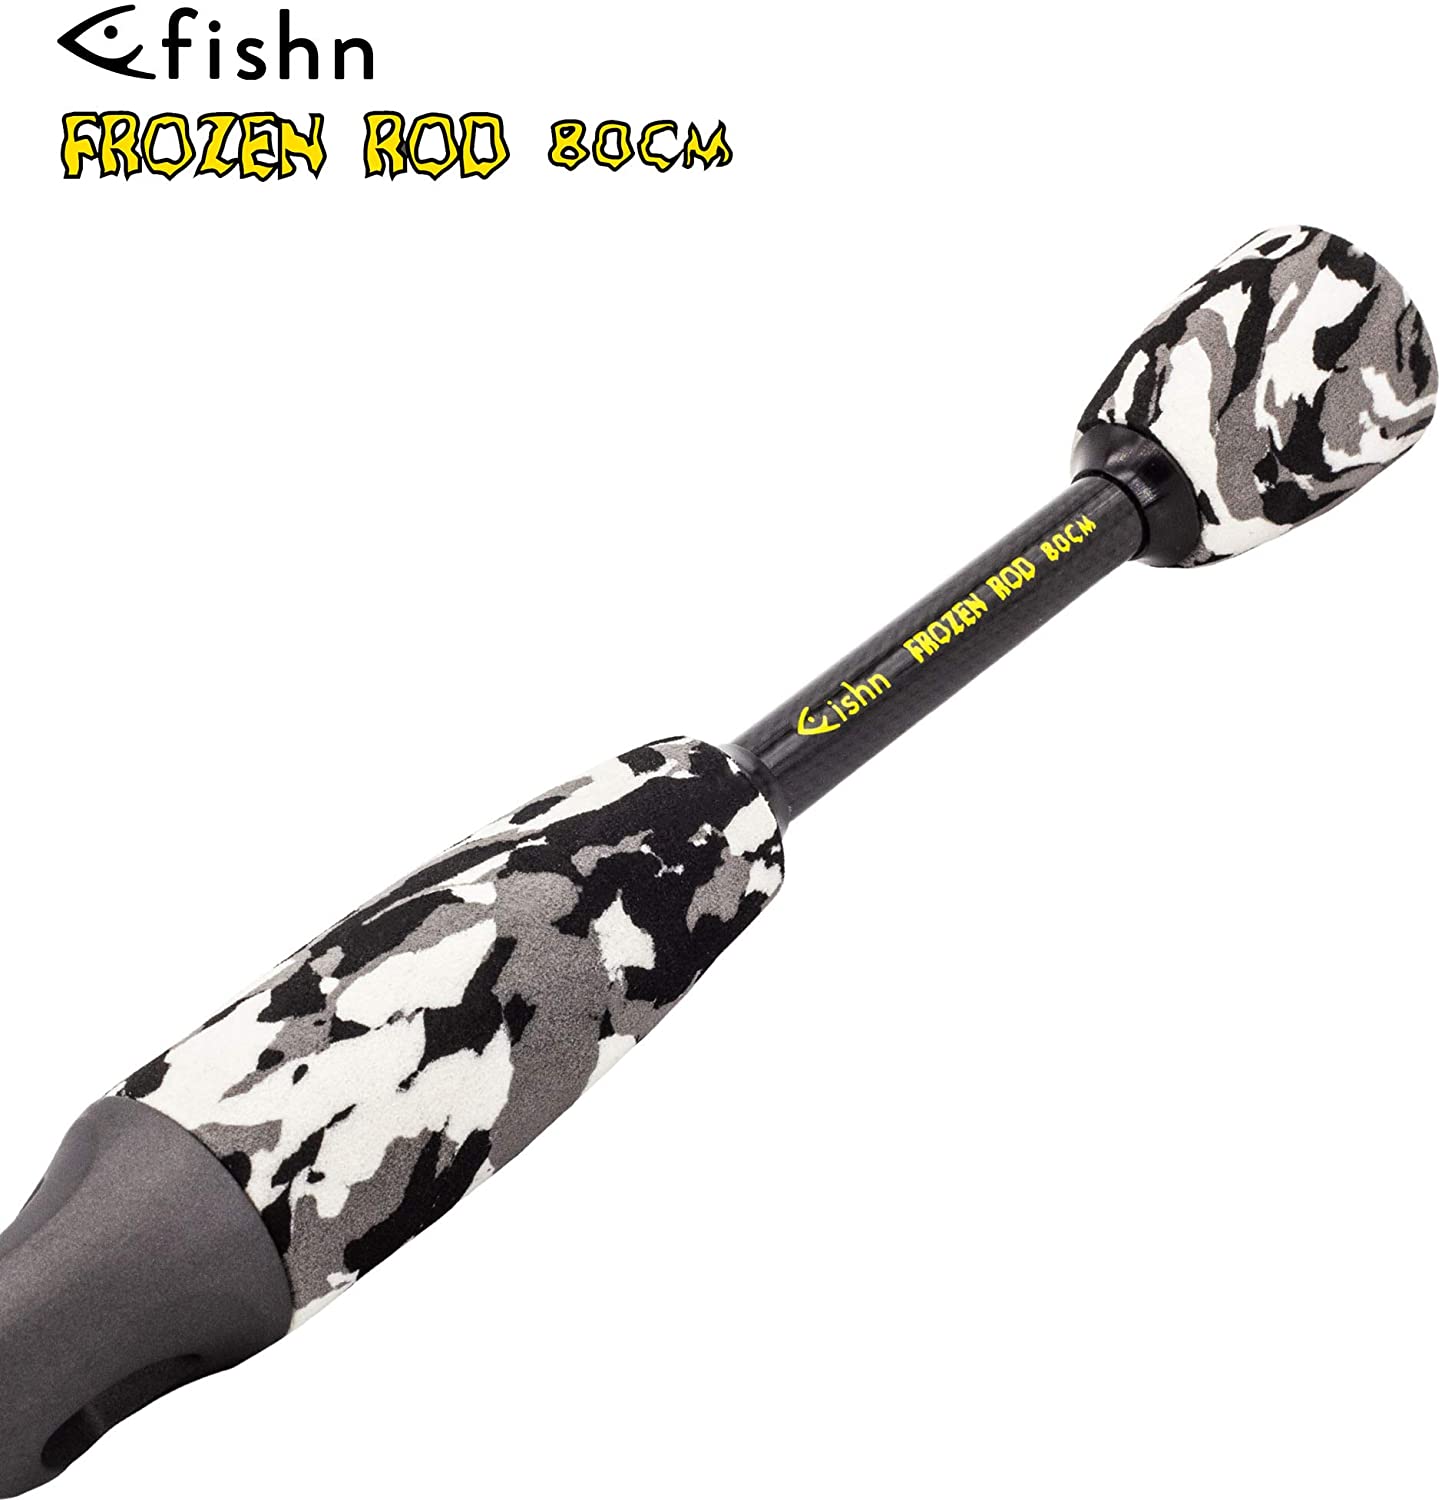 FISHN FROZEN Ice fishing, ice rod, ice fishing rod - length: 80cm - high  resilience - handy and light – carbon, for fishing for all types of fish  such